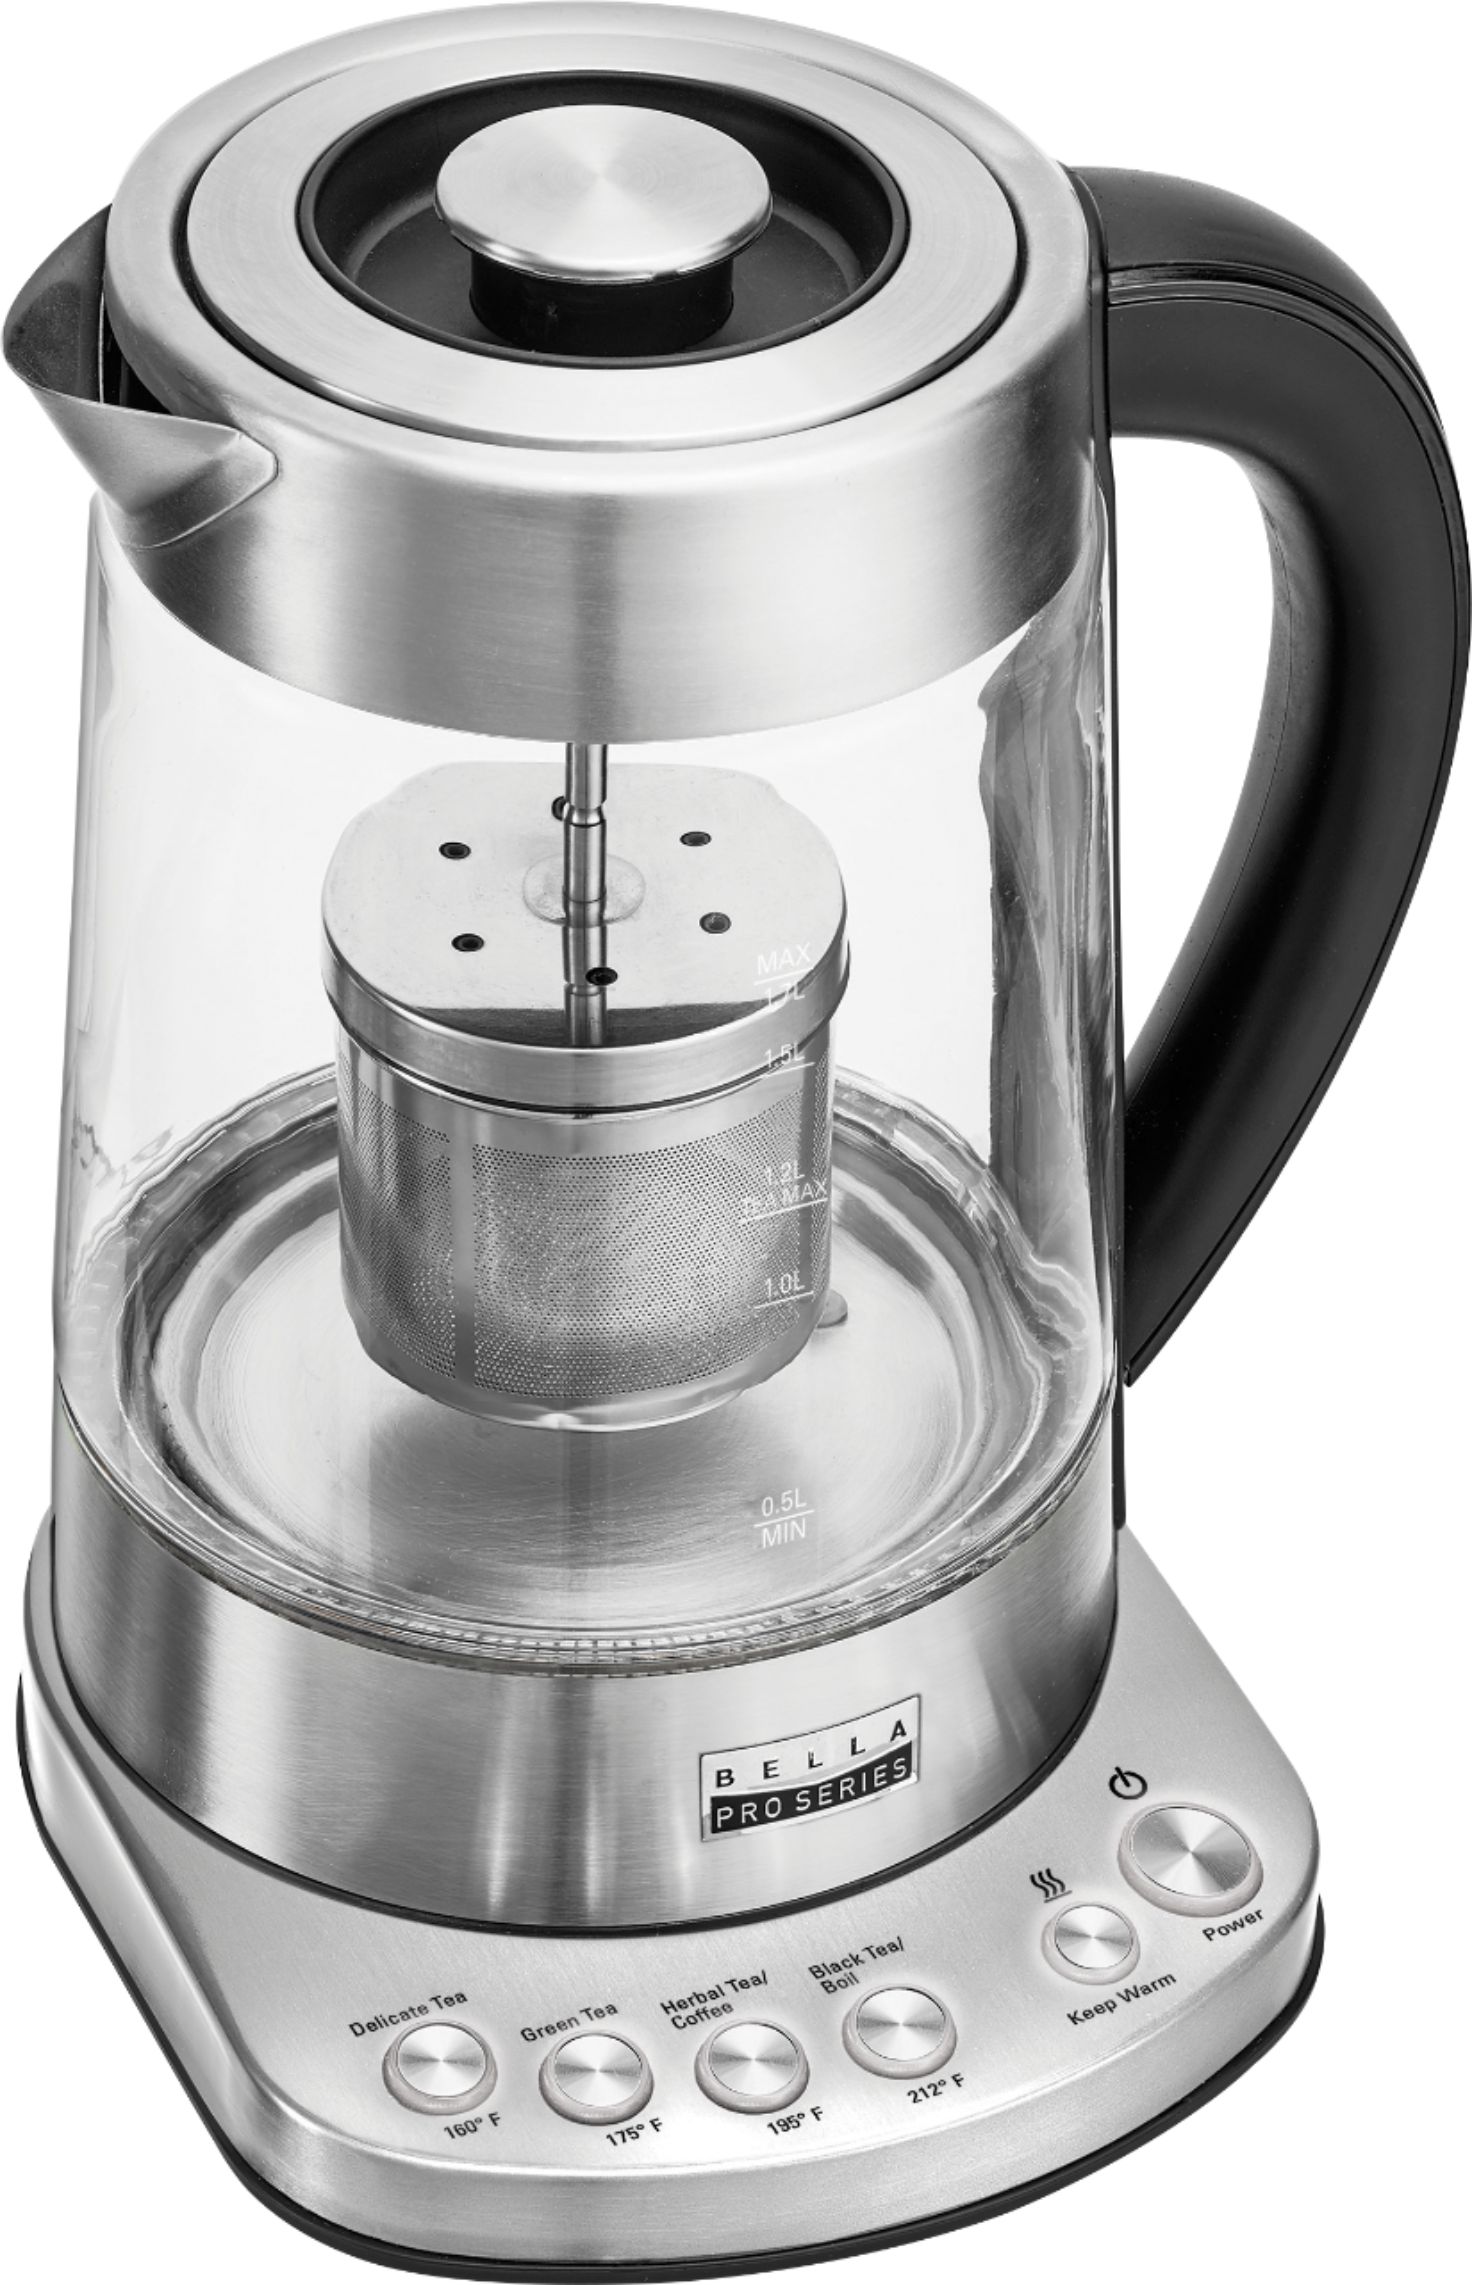 electric tea kettle at target